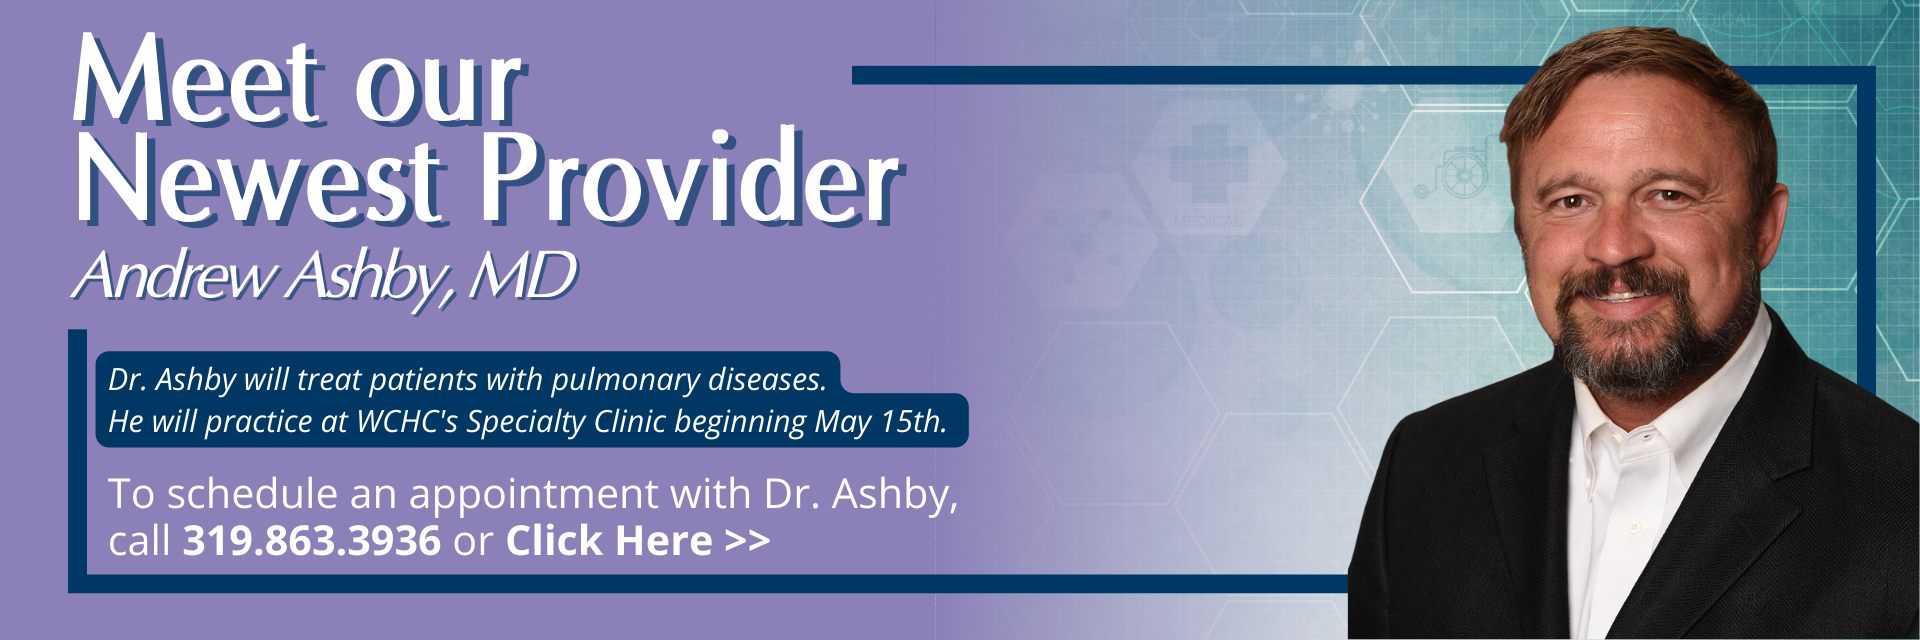 Meet our newest provider. Andy Ashby, MD